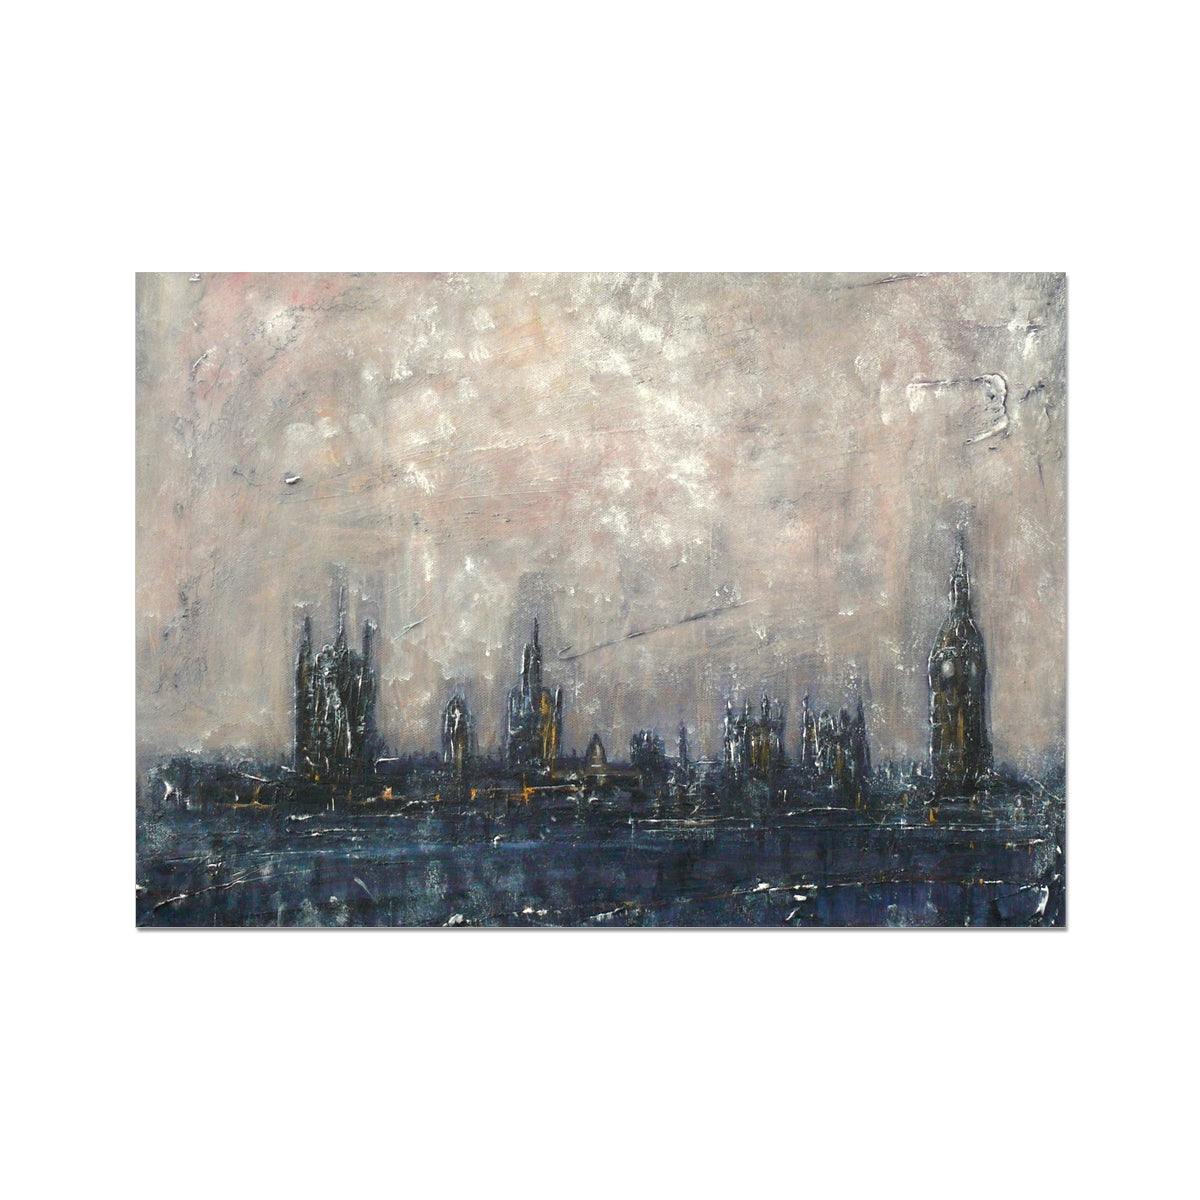 Winter In London Painting | Fine Art Prints From Scotland-Unframed Prints-World Art Gallery-A2 Landscape-Paintings, Prints, Homeware, Art Gifts From Scotland By Scottish Artist Kevin Hunter